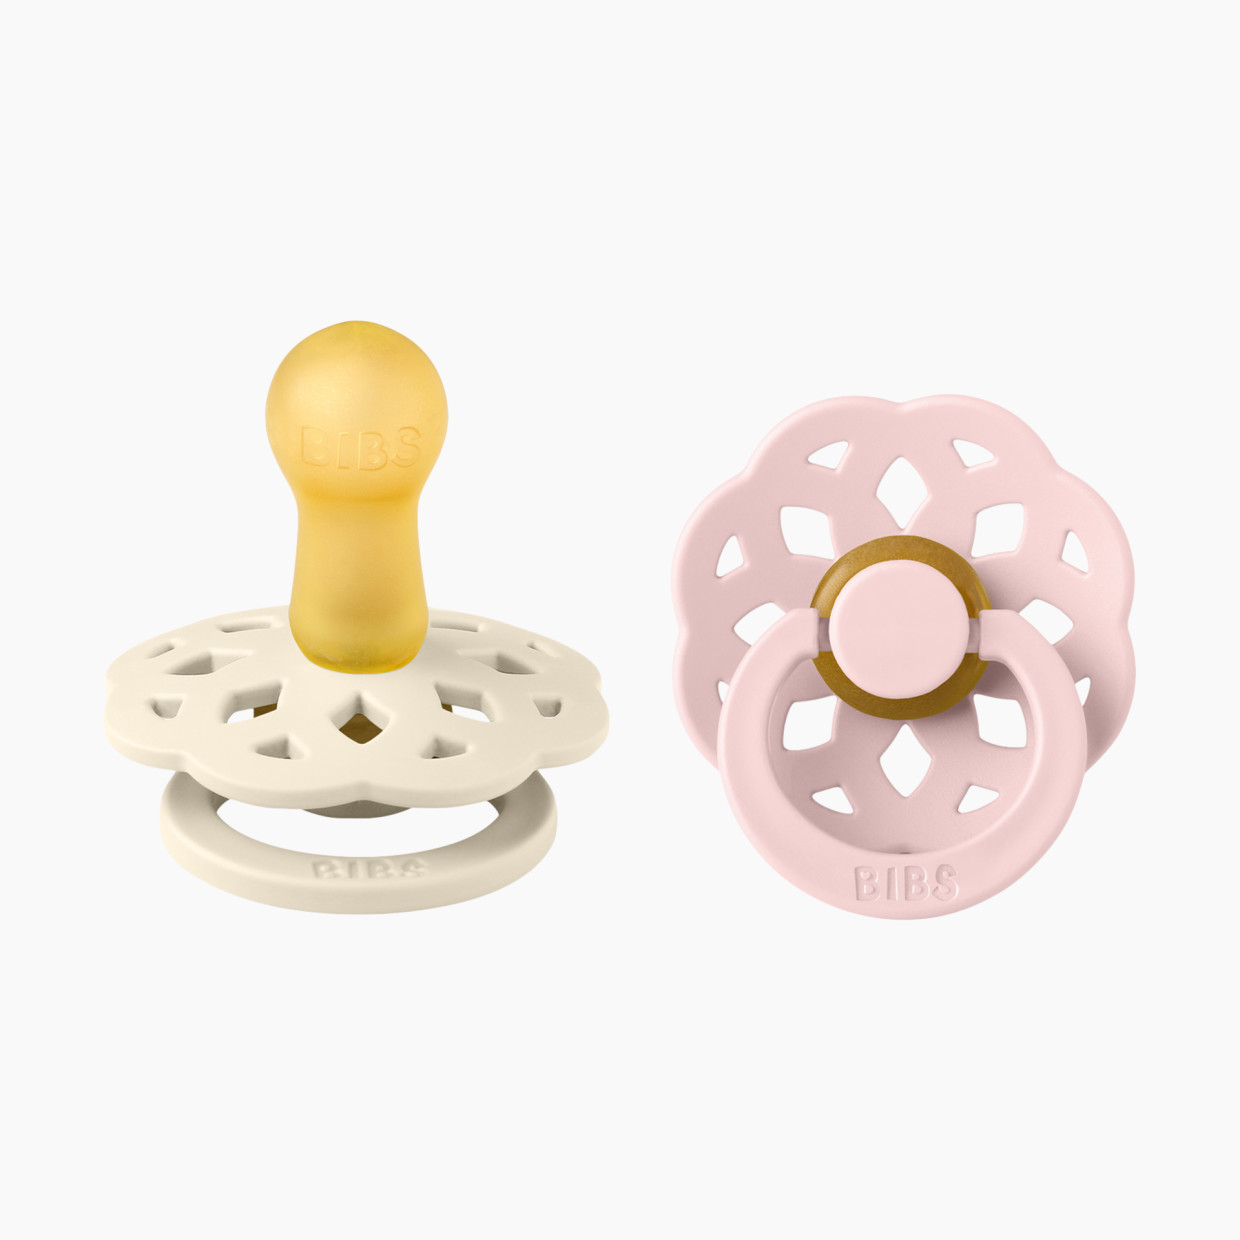 BIBS Boheme Natural Rubber Pacifier (2 Pack) - Ivory / Blossom, Size 1.